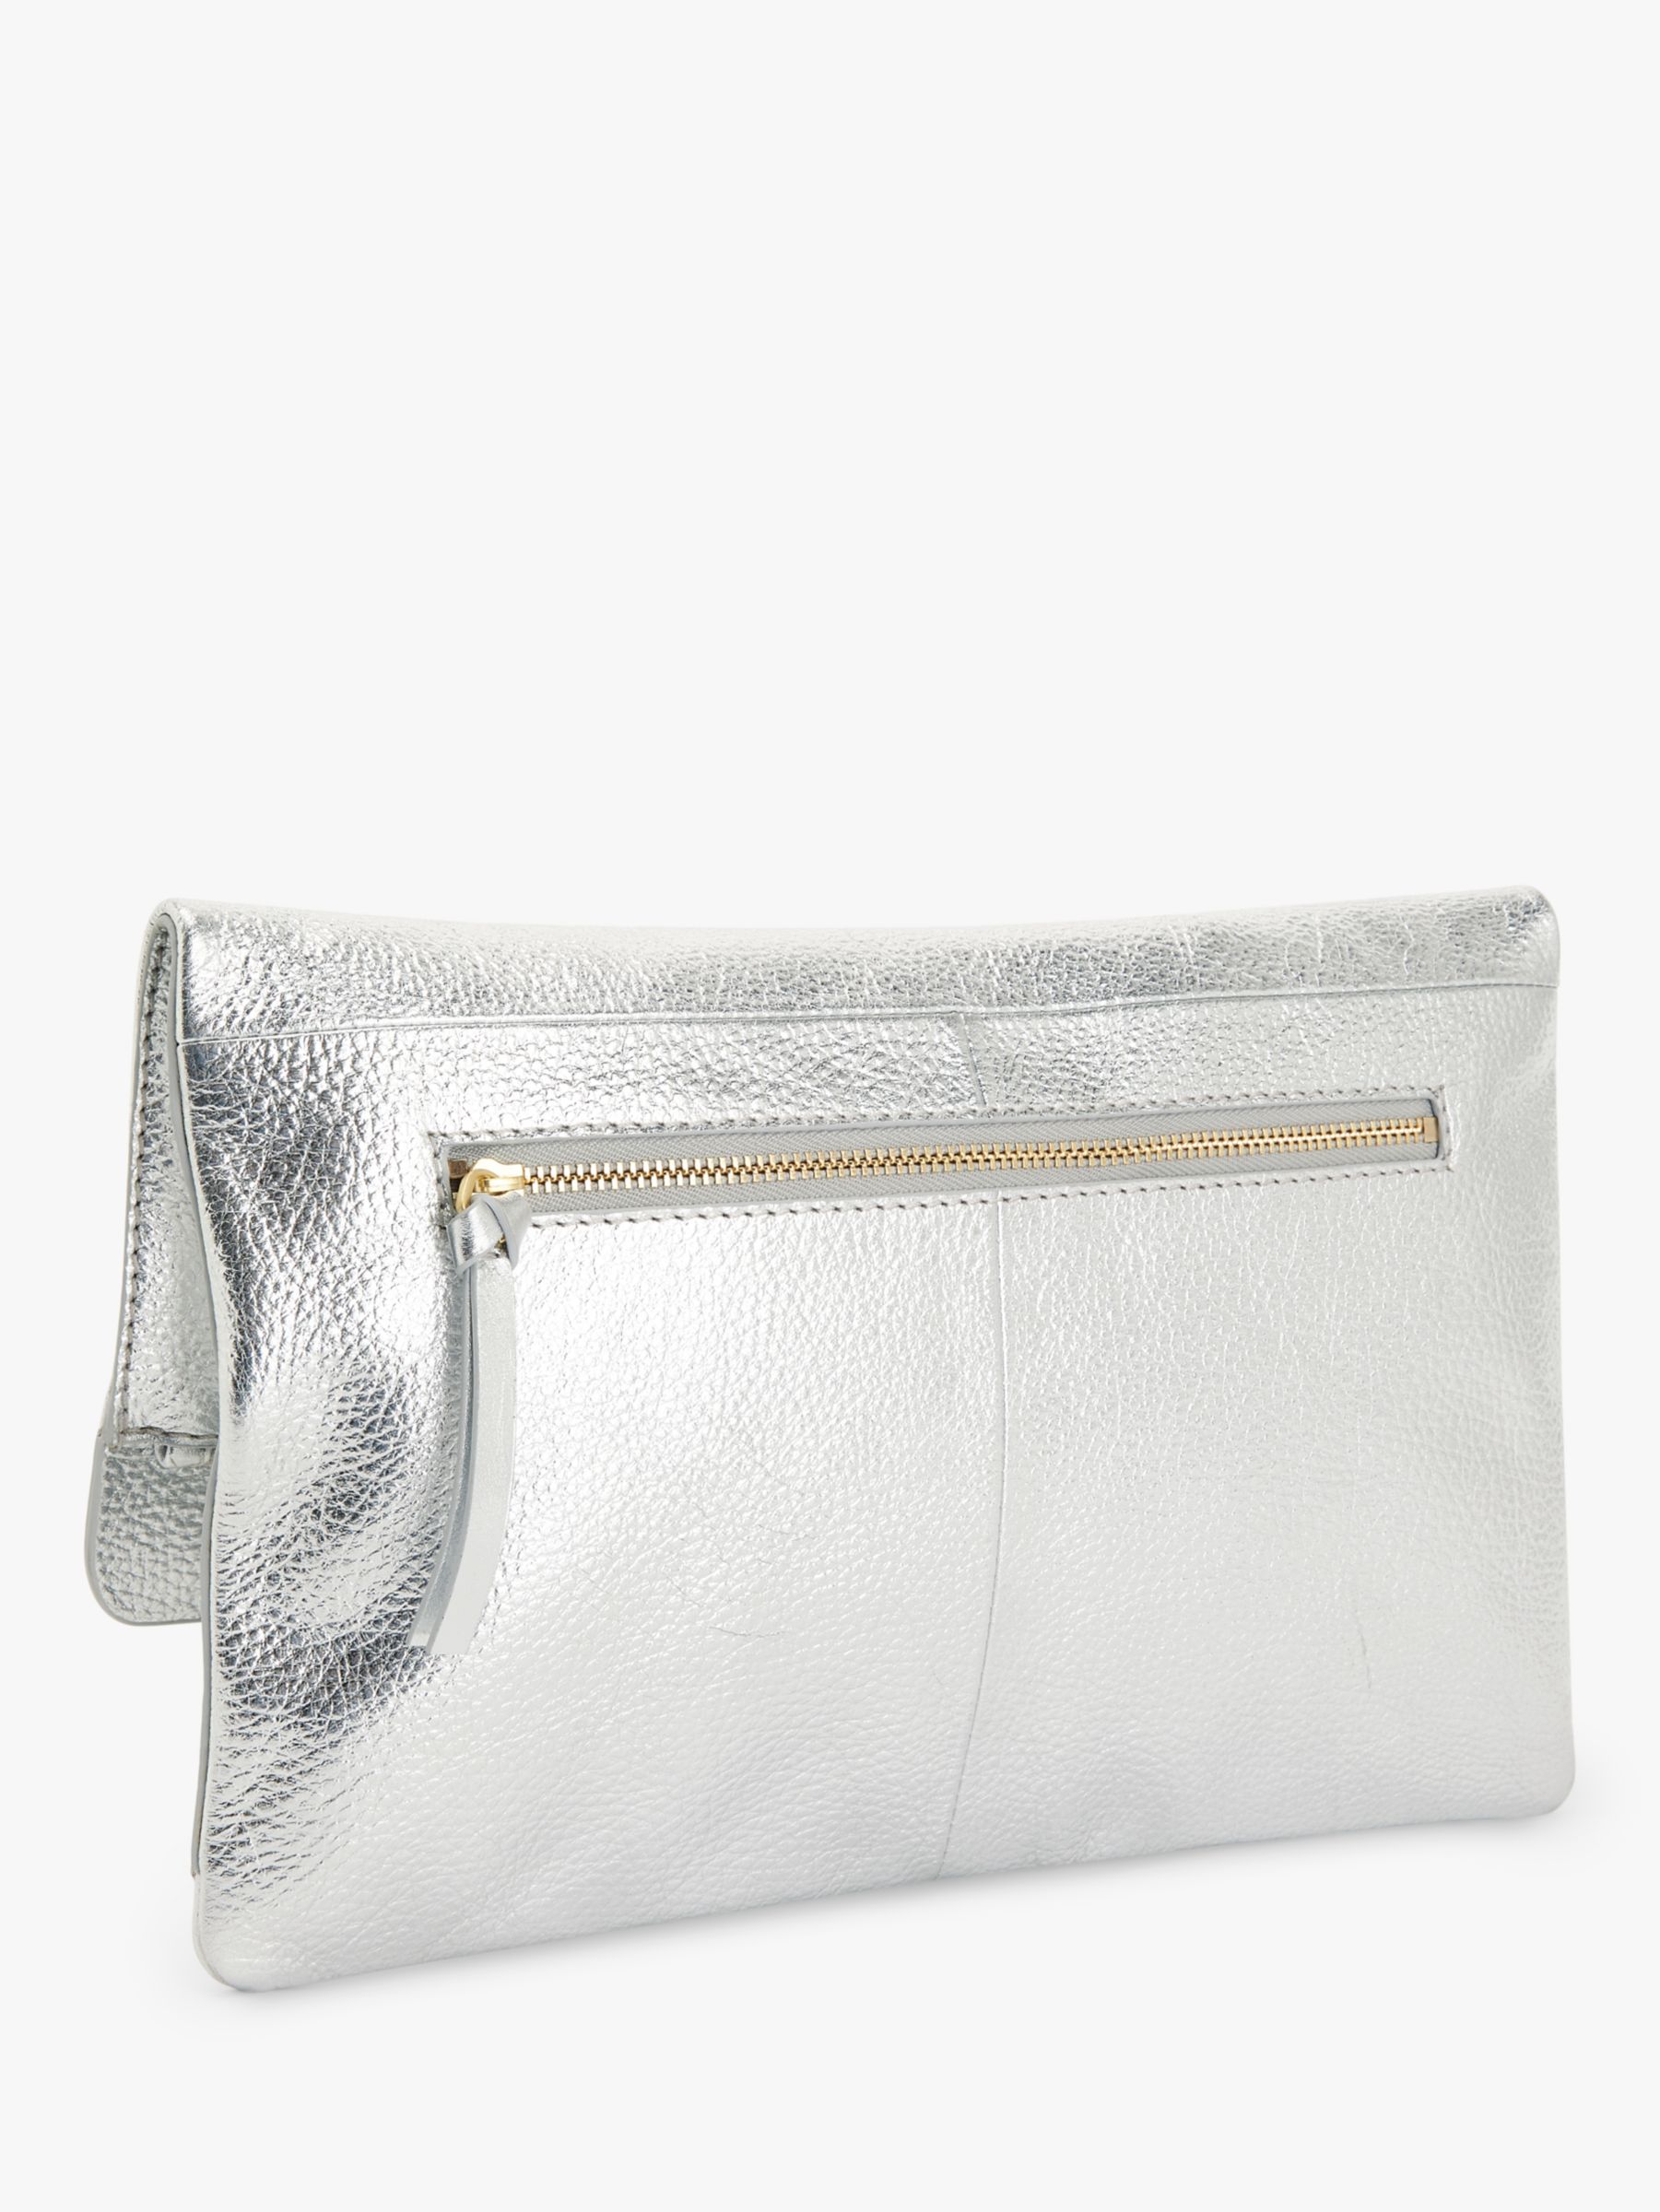 John Lewis Mistry Leather Flapover Clutch Bag, Silver Leather at John ...